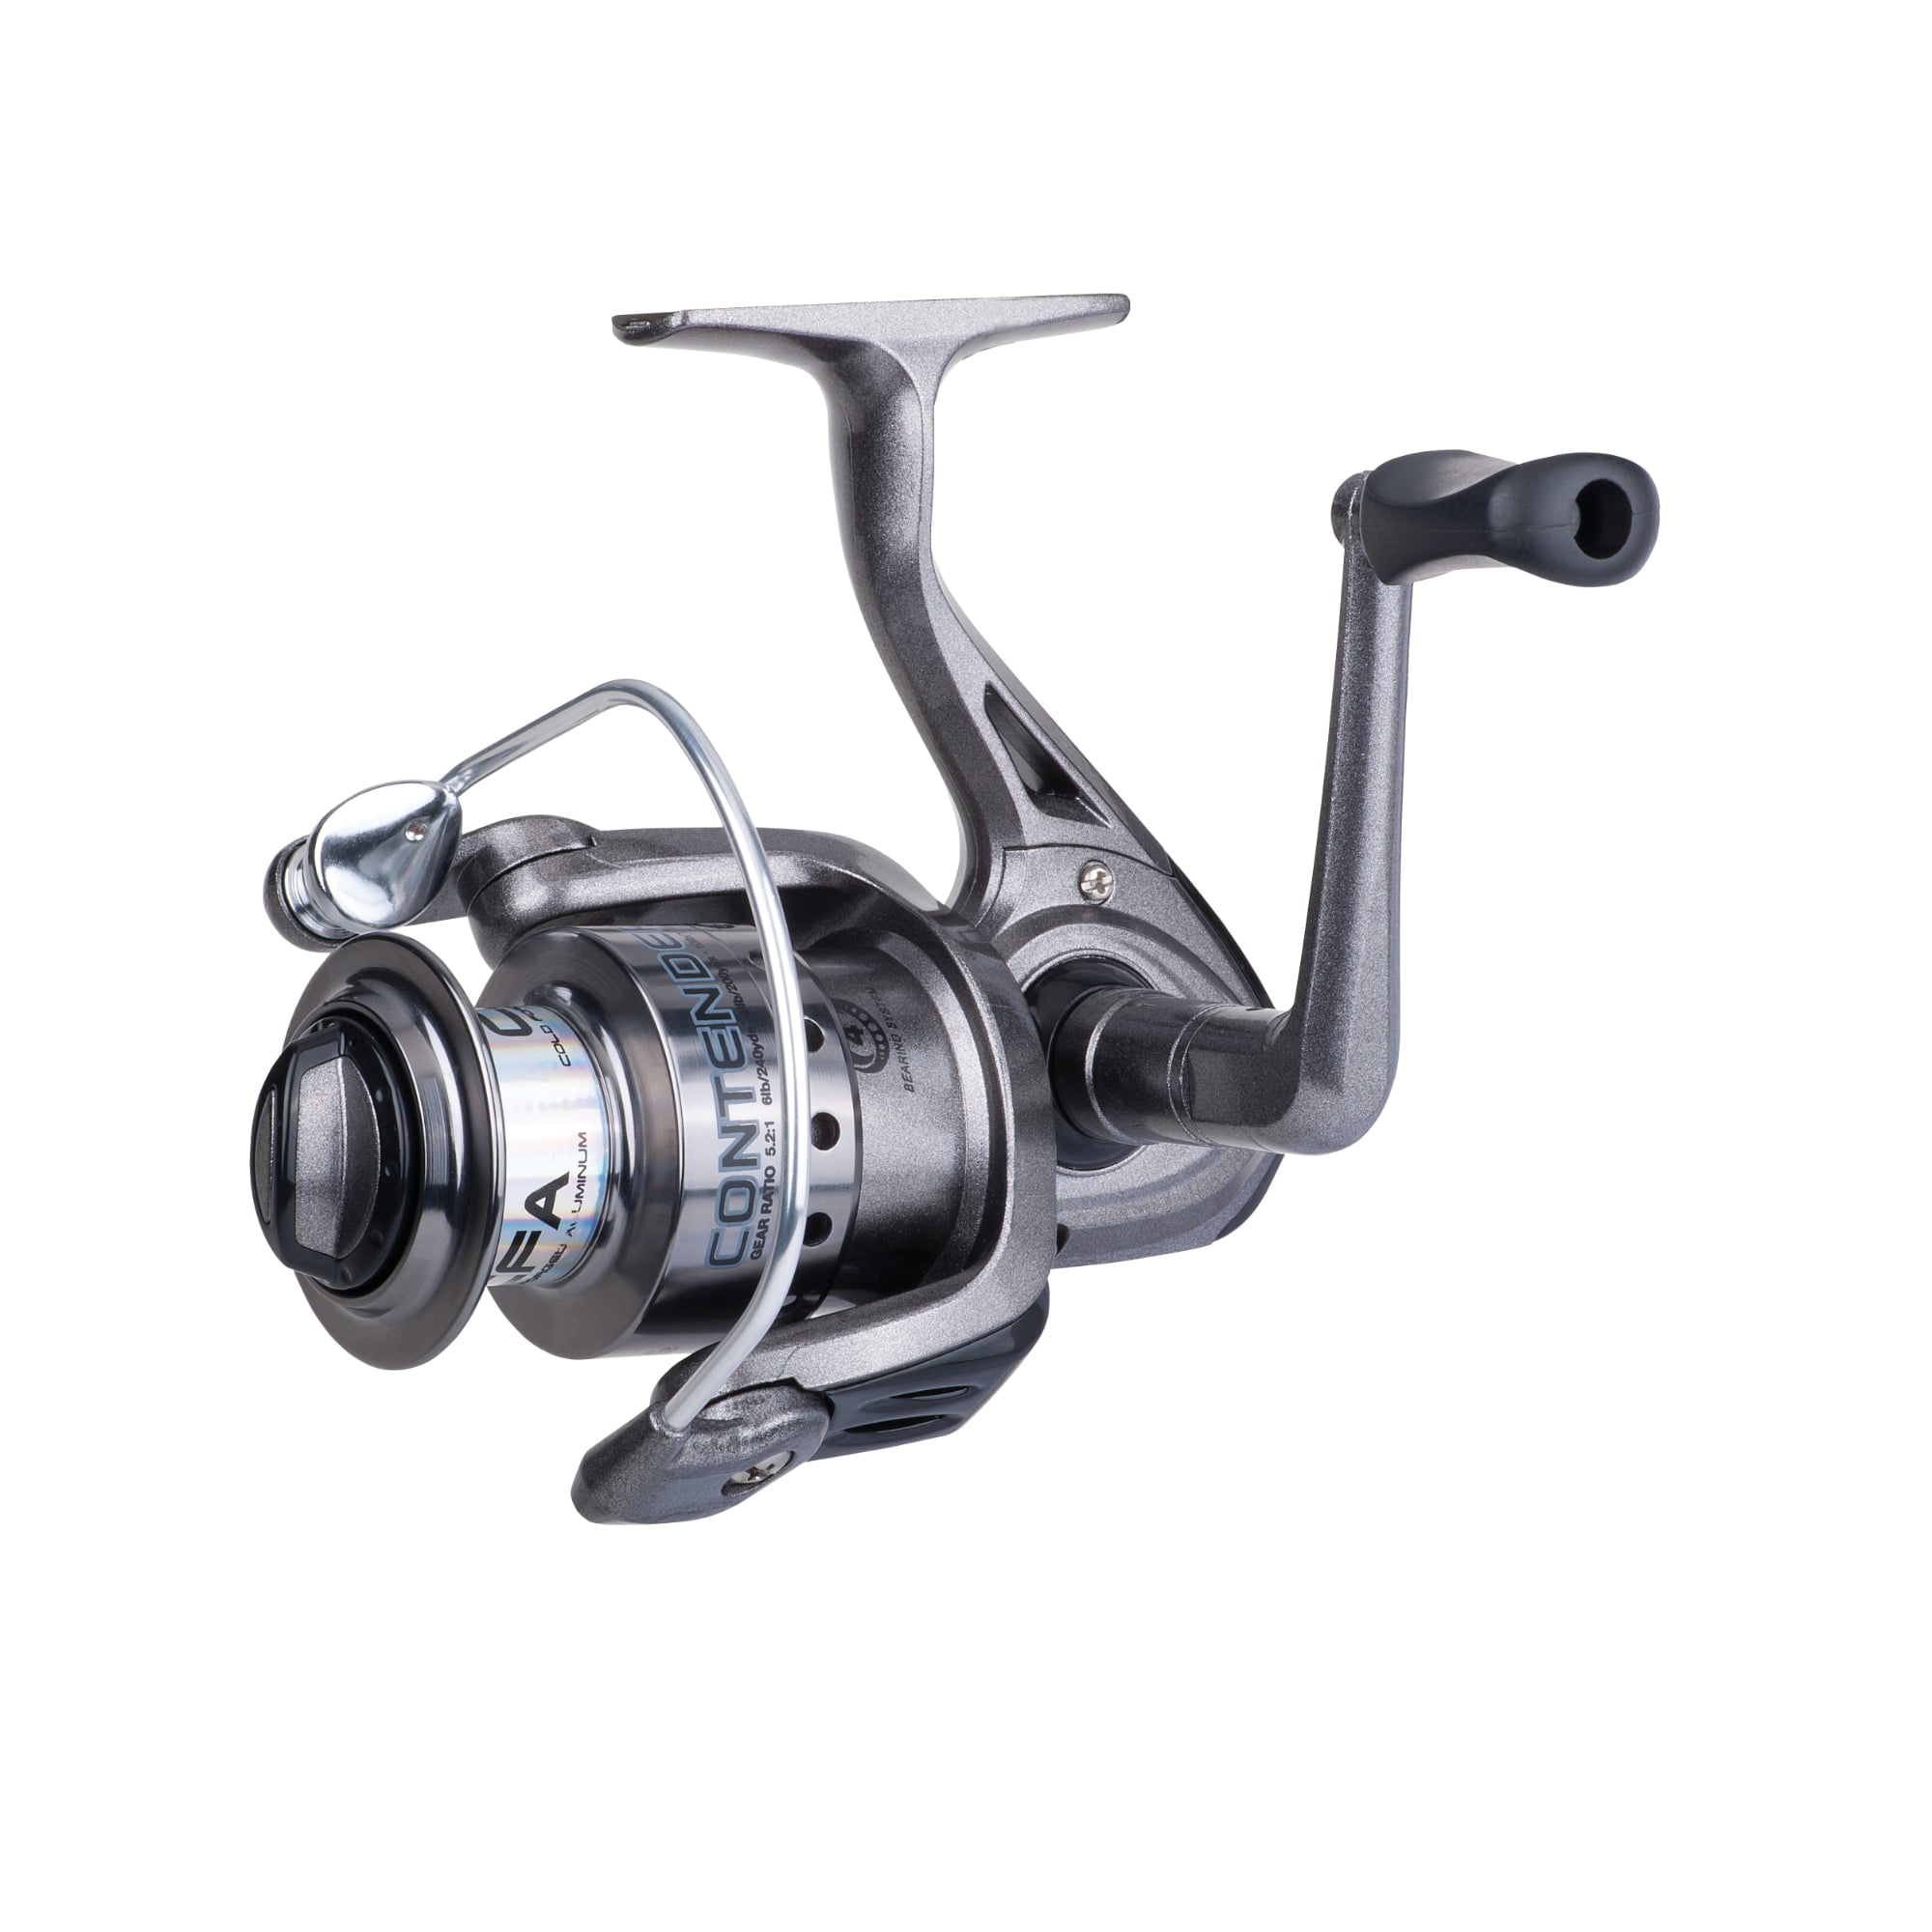 Includes Sea Tackle Pack Shakespeare Contender FD70 Sea Fishing Reel 